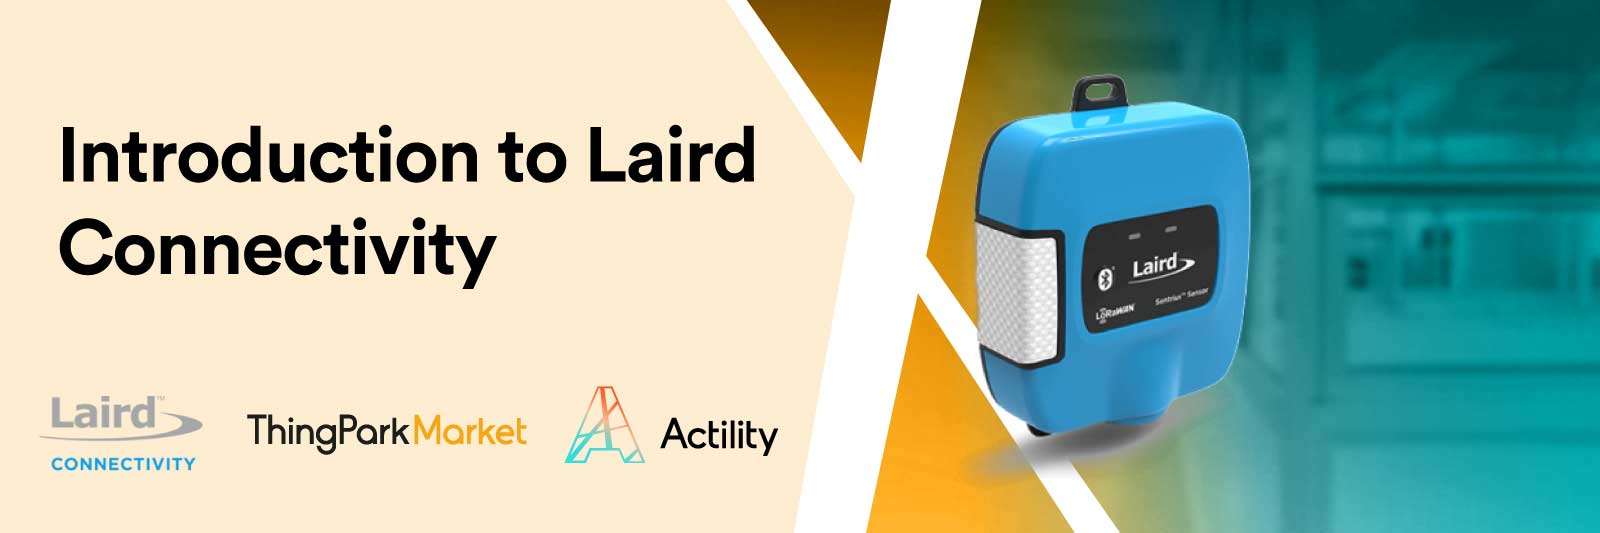 Introduction to Laird Connectivity